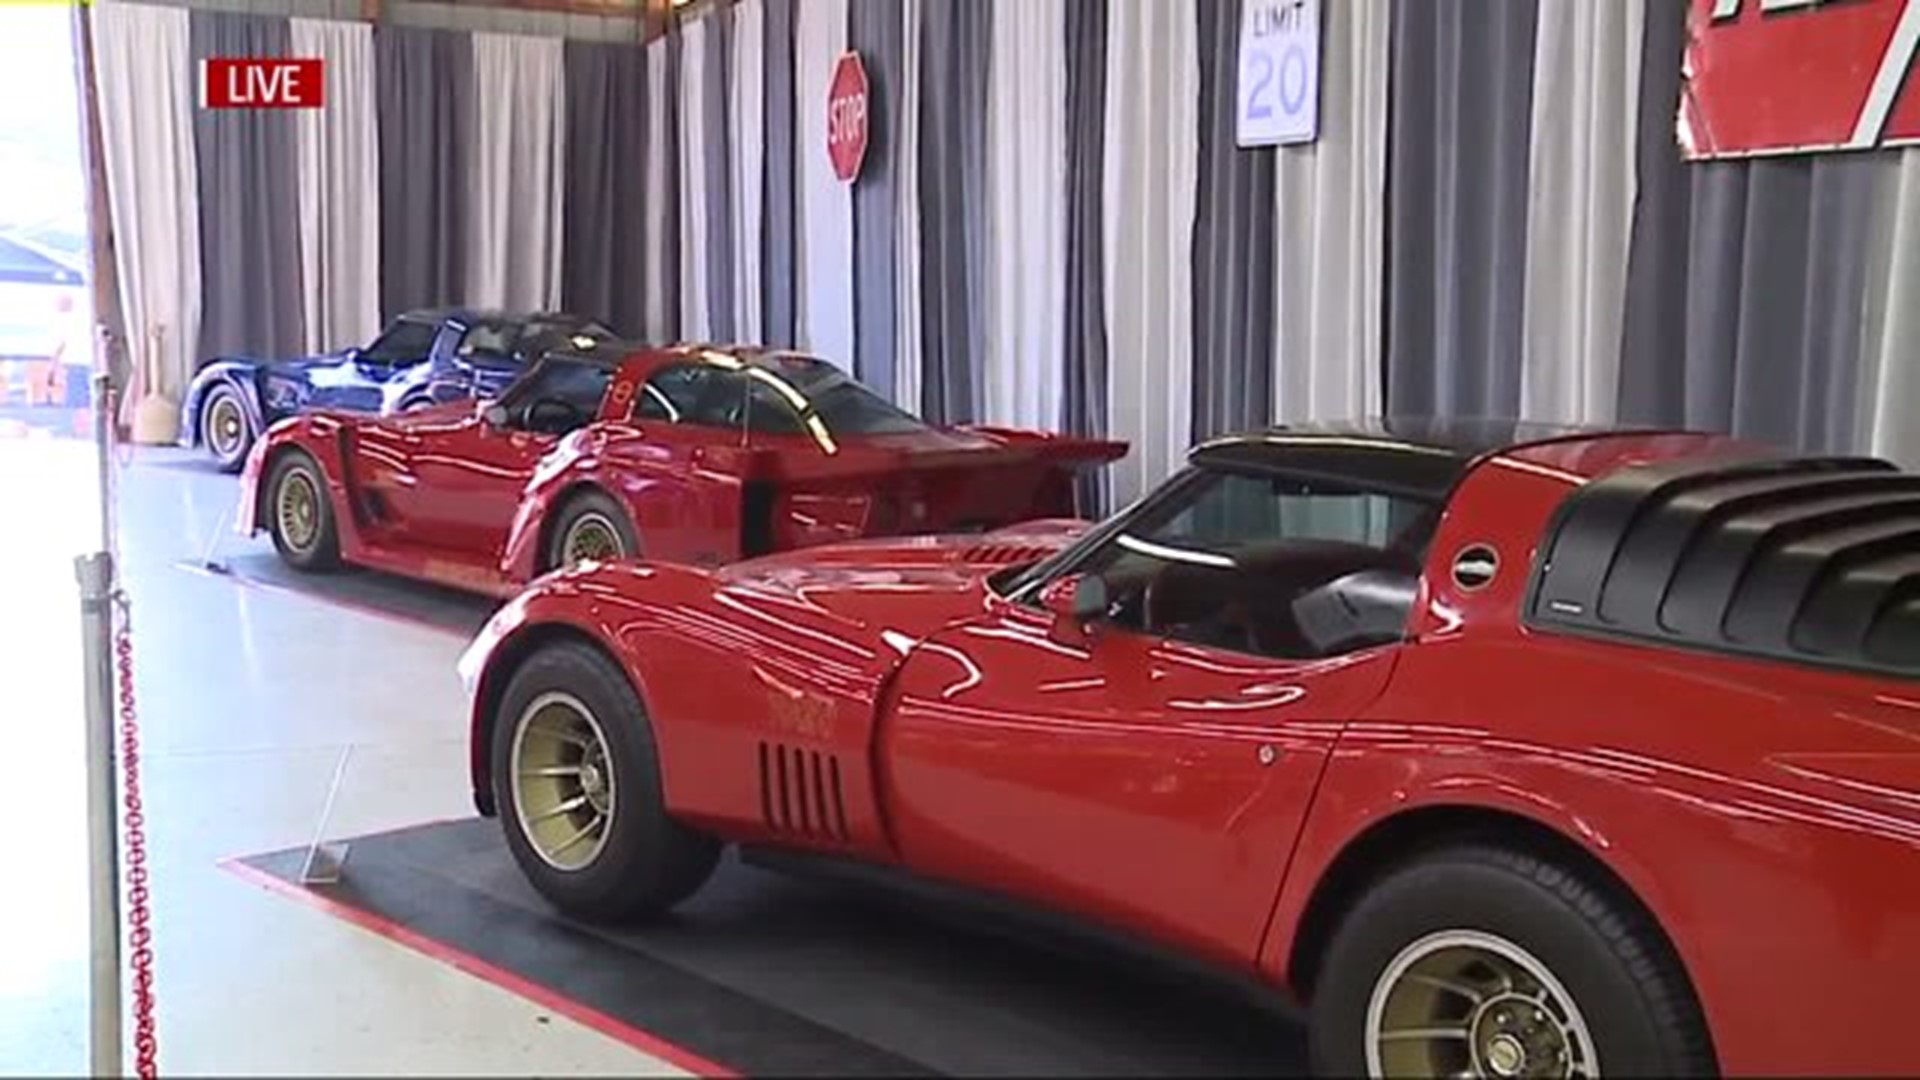 The annual Corvettes at Carlisle event is kicking off this weekend